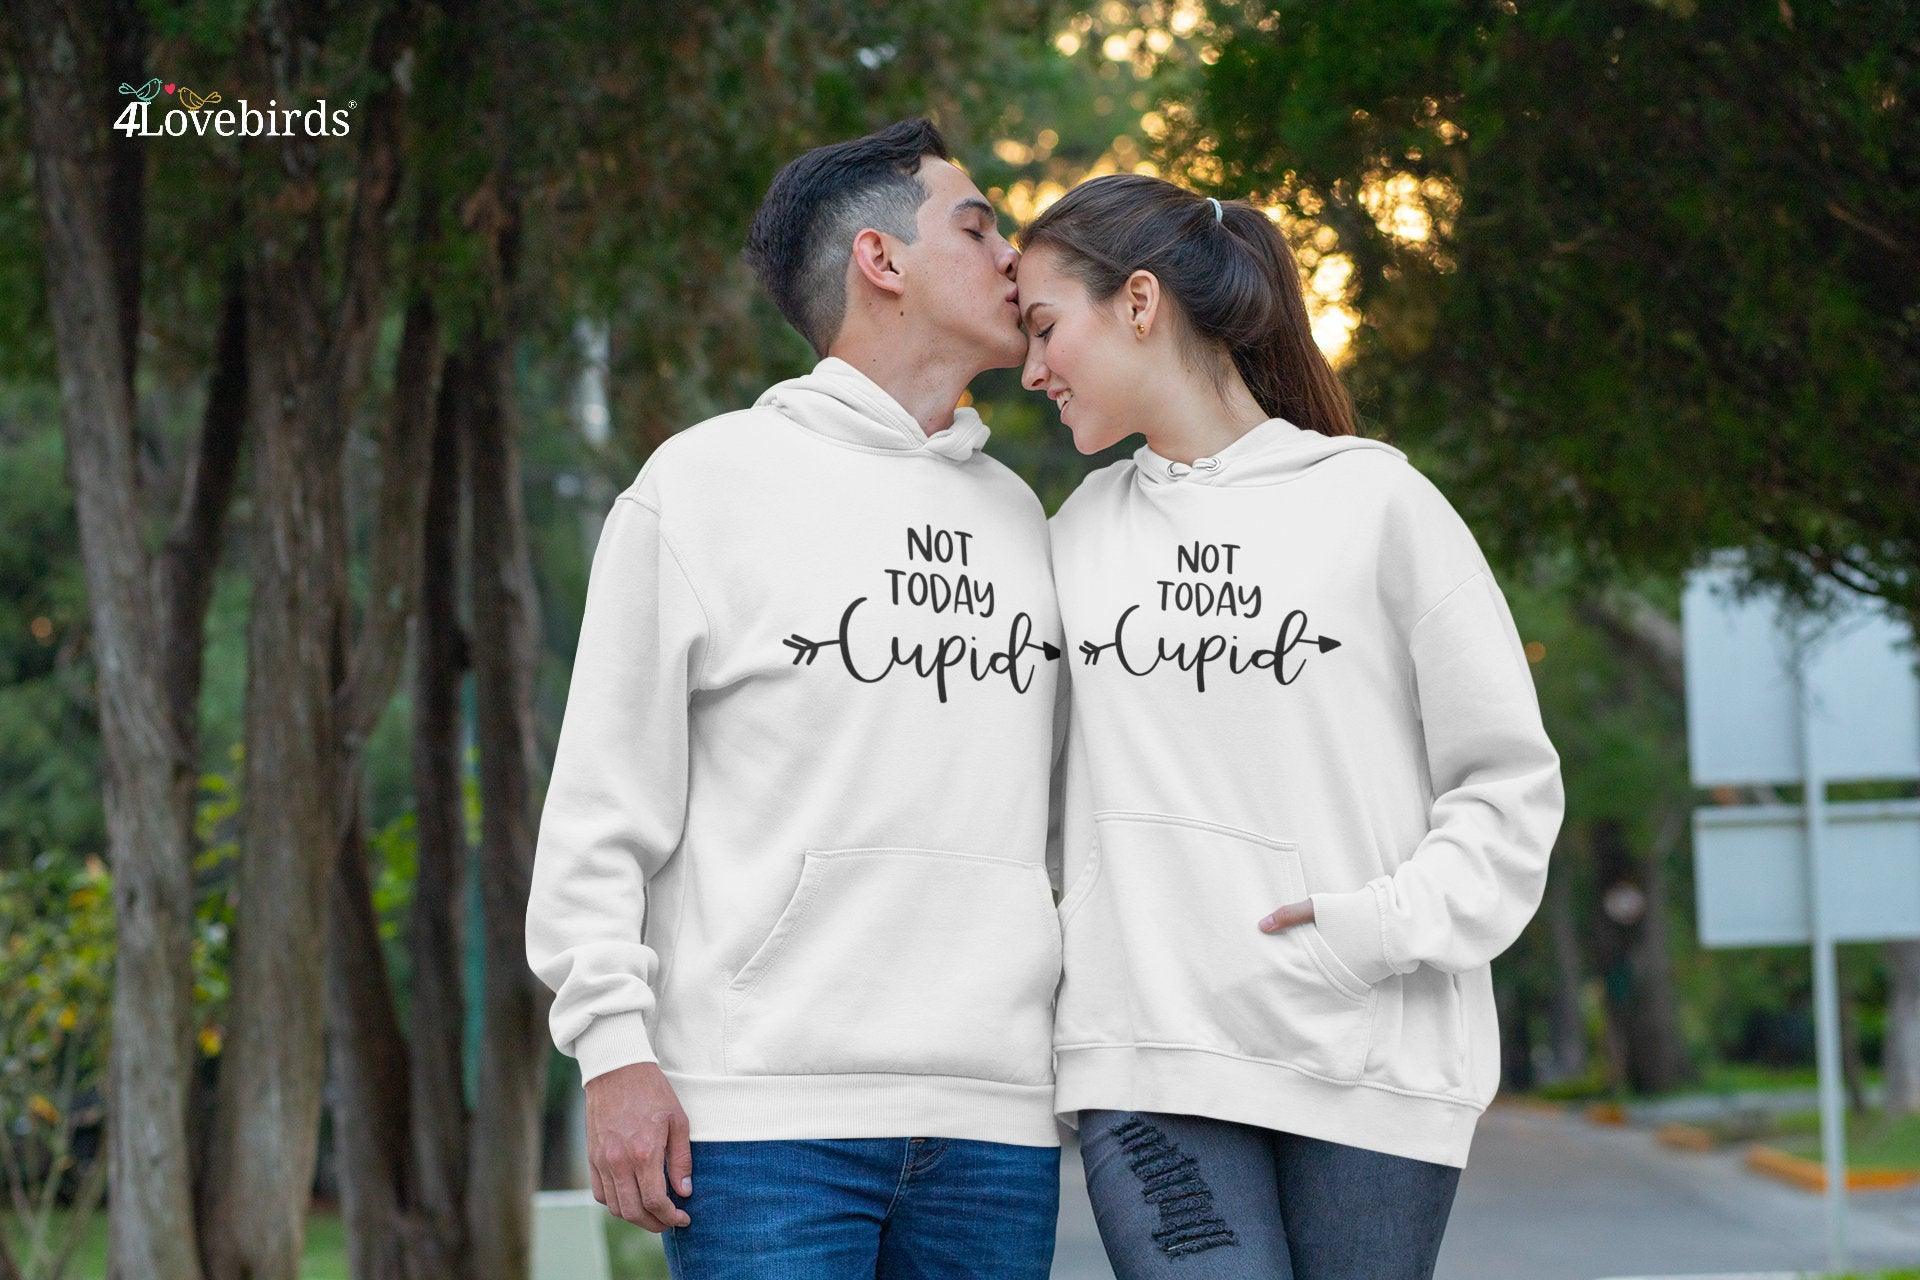 Not today cupid Hoodie, Funny T-shirt, Gift for Couples, Valentine Sweatshirt, Boyfriend and Girlfriend Longsleeve, funny shirt - 4Lovebirds